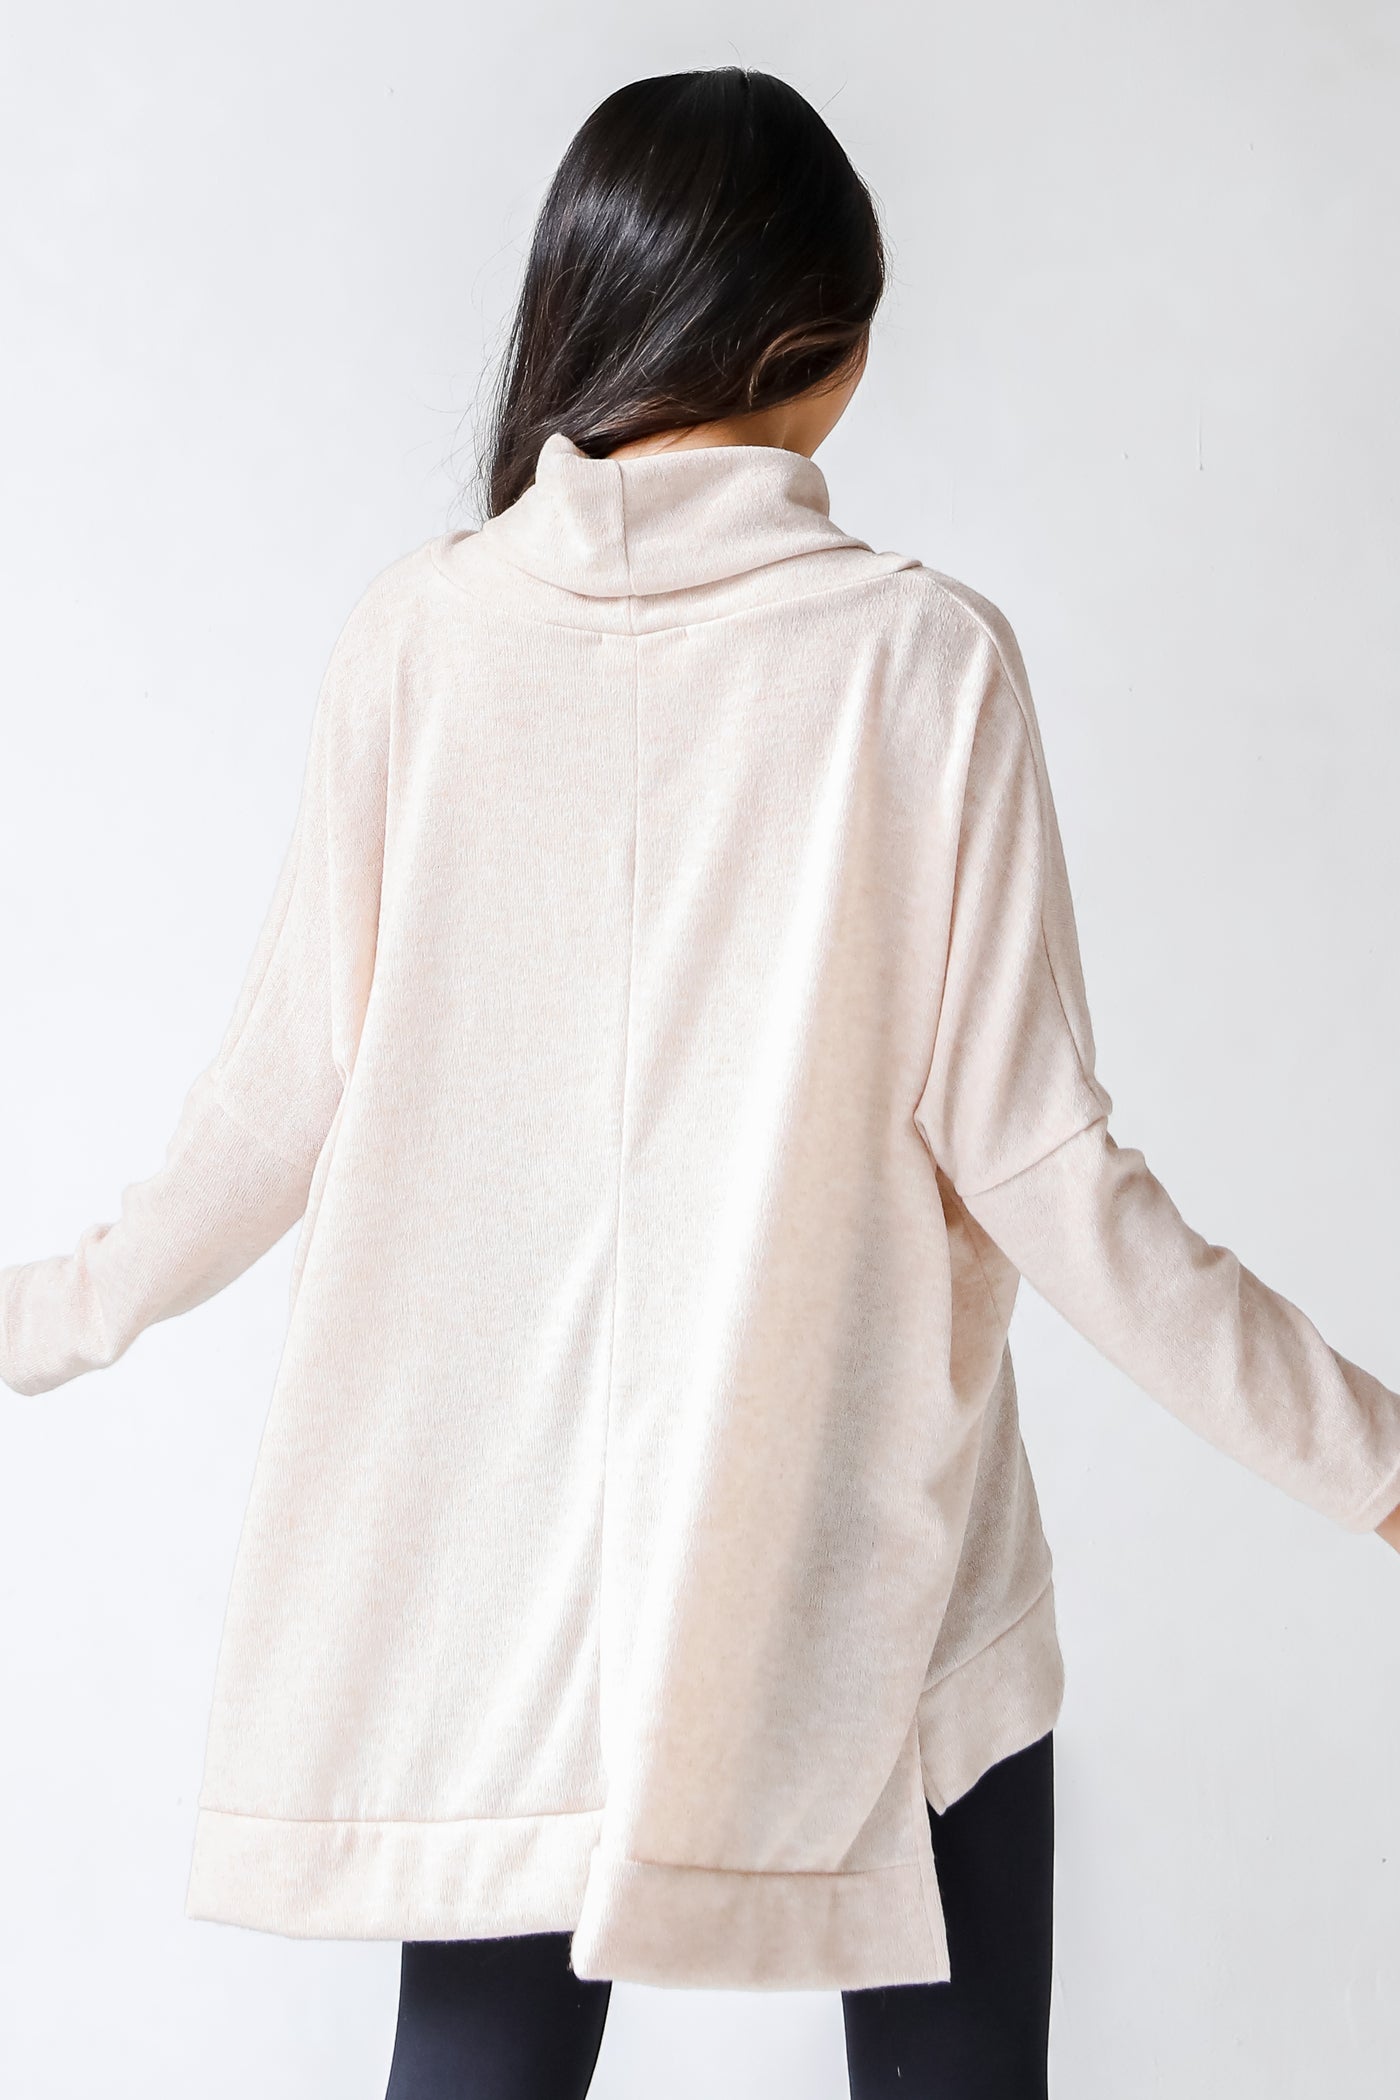 Cowl Neck Knit Top in oatmeal back view